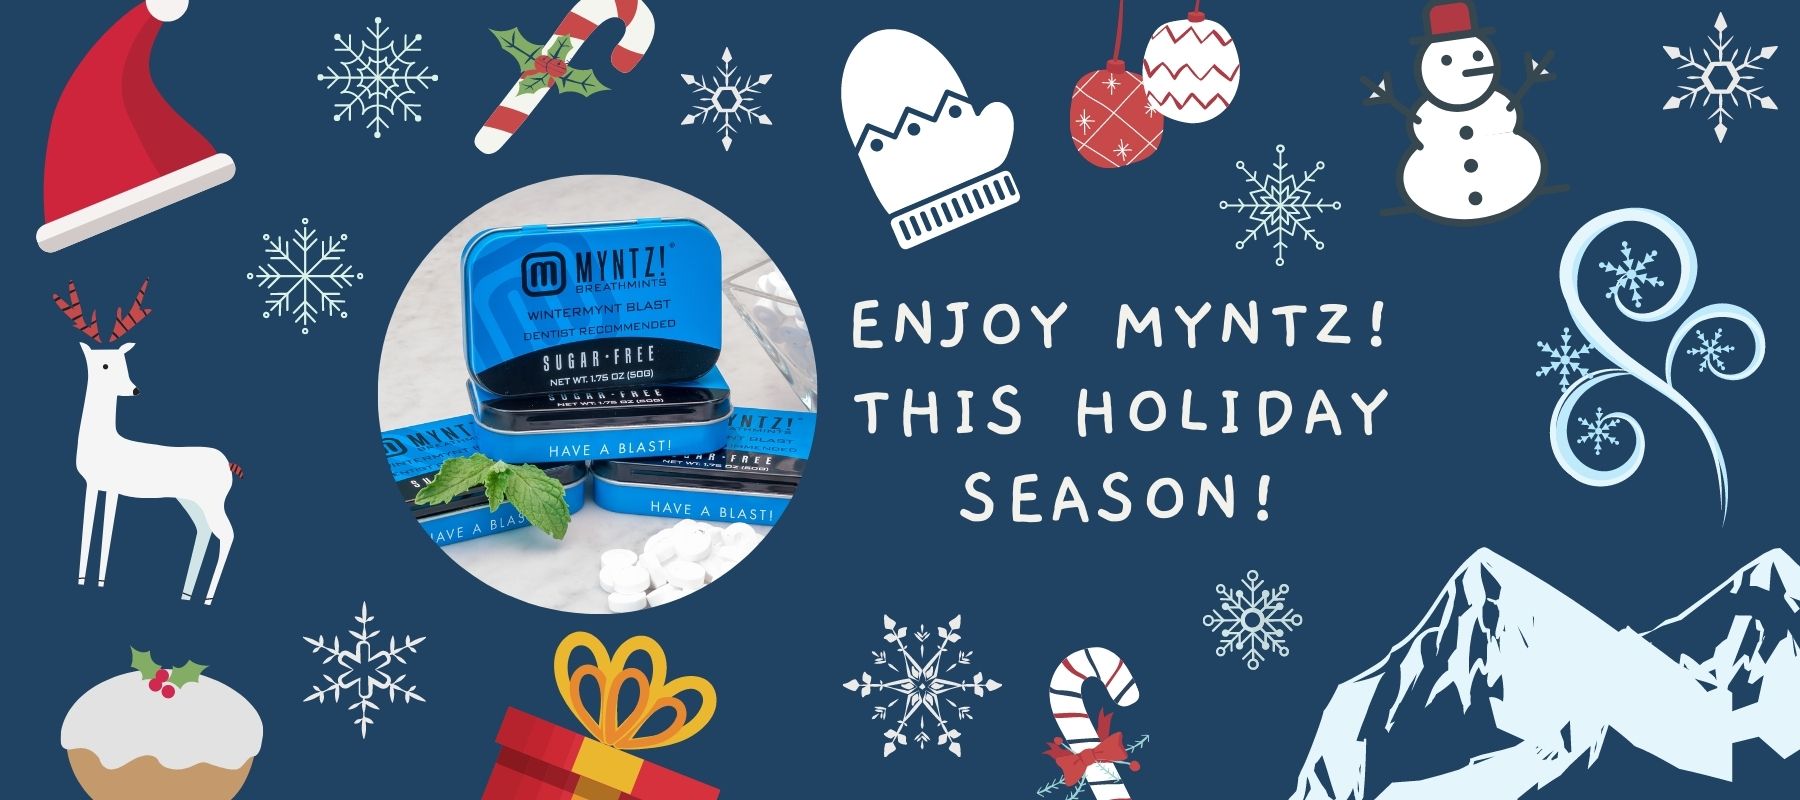 Enjoy Myntz! Breathmints This Holiday Season and Share Our Delicious Peppermint-Infused Flavors